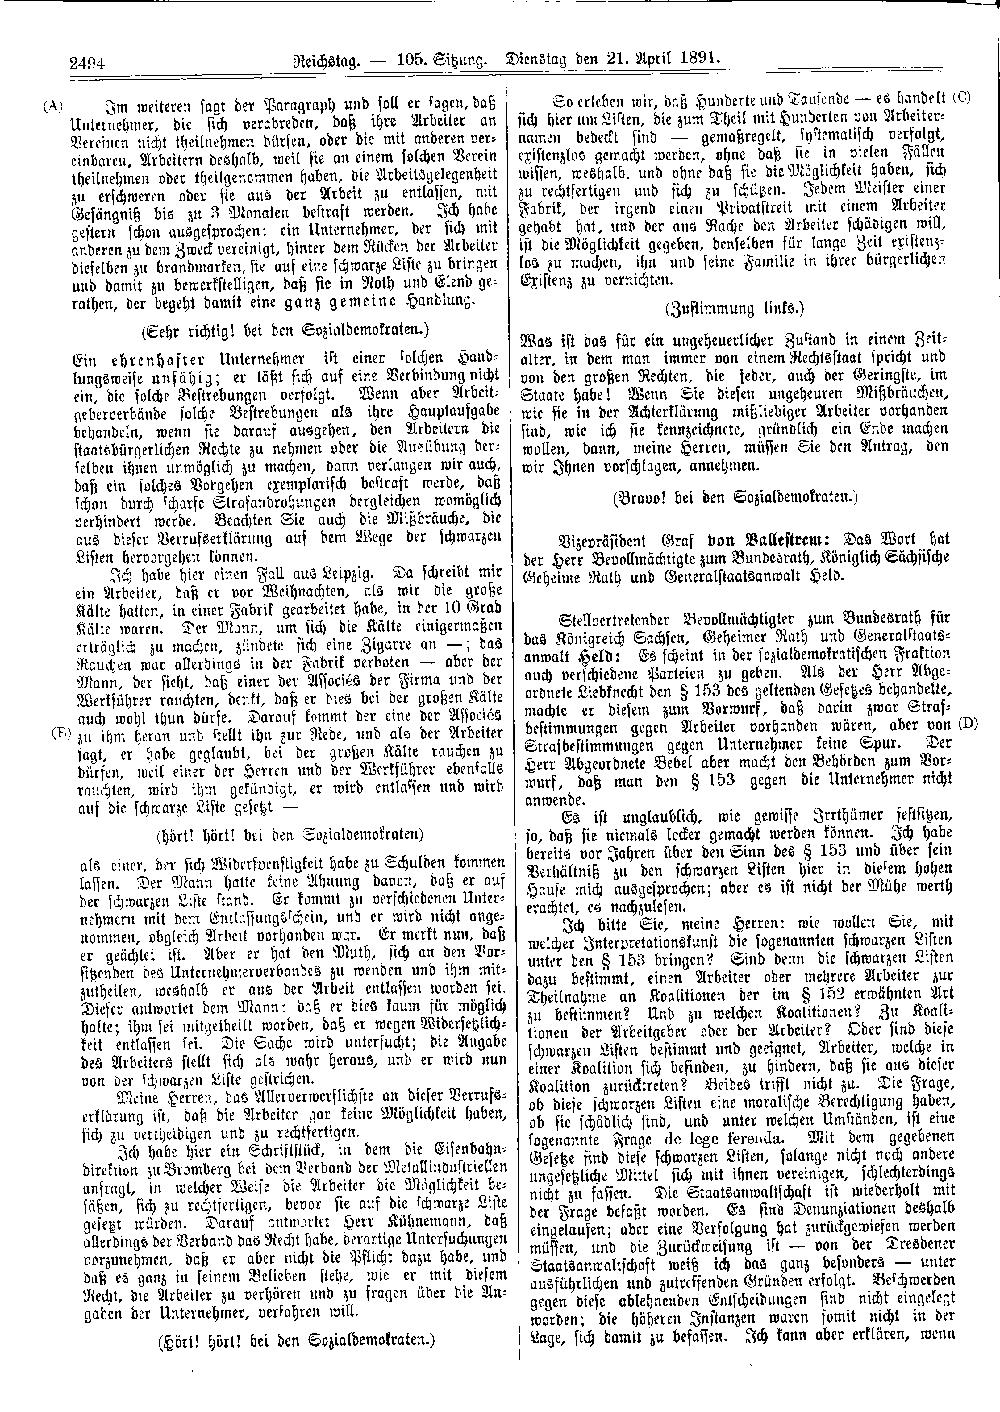 Scan of page 2494